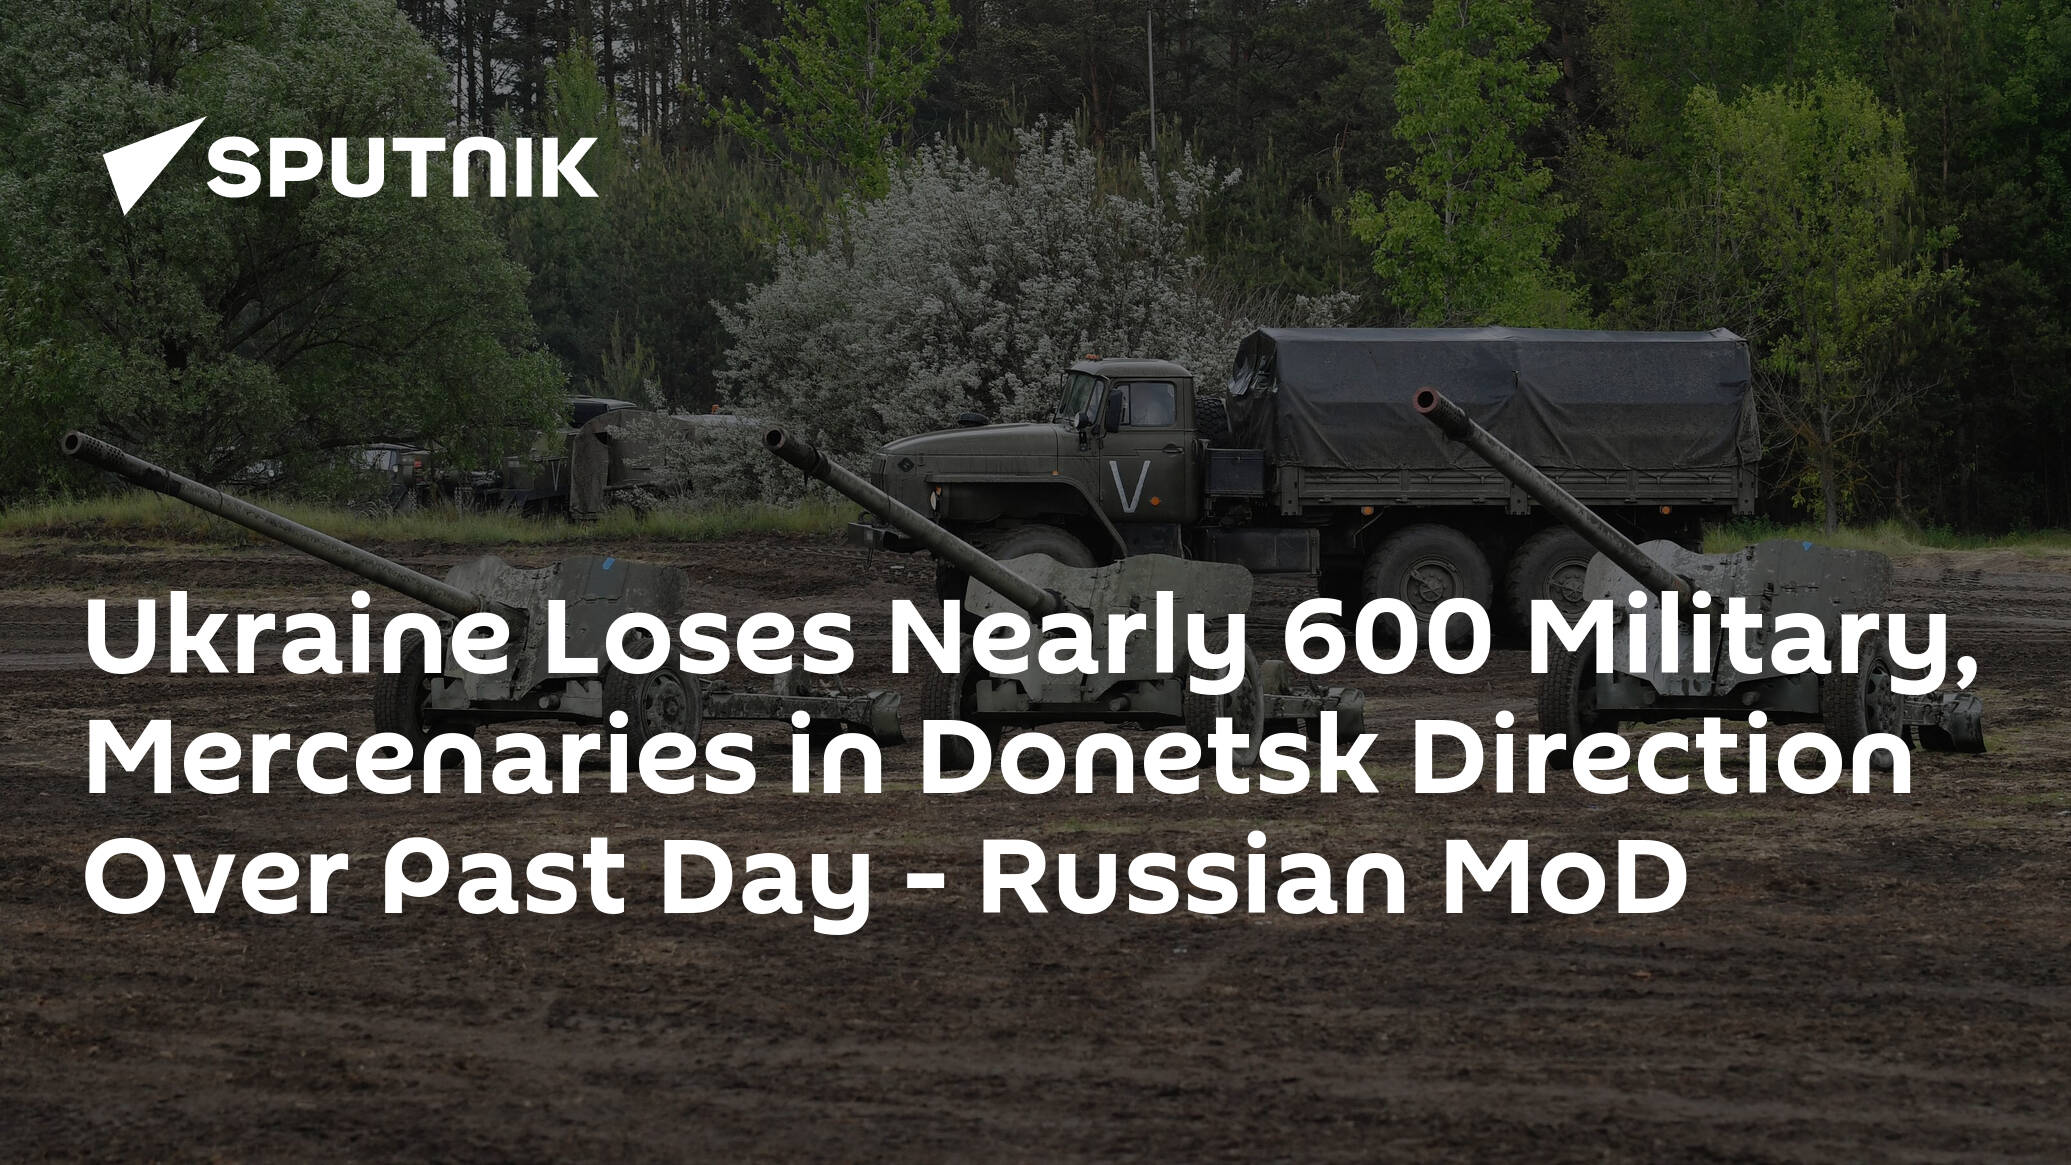 Moscow: Ukraine Loses Nearly 600 Military, Mercenaries in Donetsk Direction Over Past Day